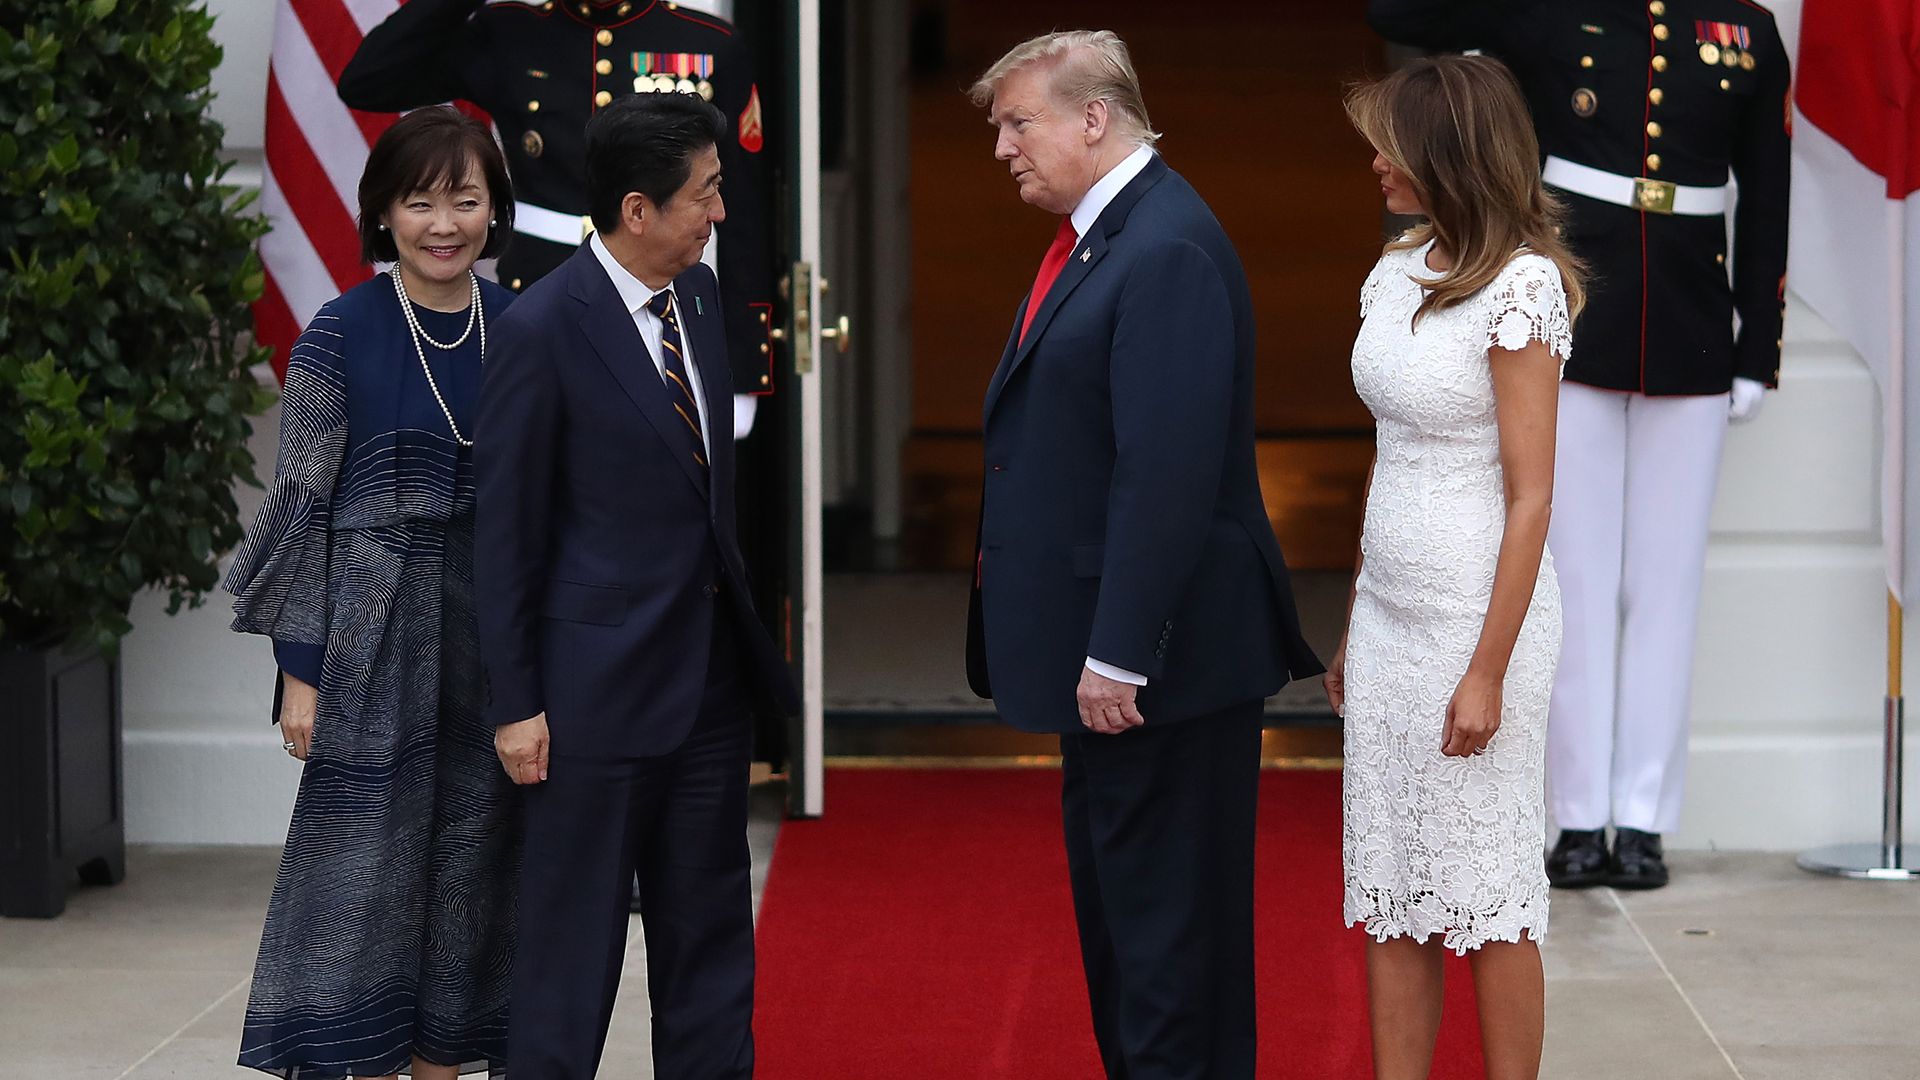 President Trump And First Lady Melania Receive Prime Minister Of Japan Abe And Mrs. Abe At White House For Dinner